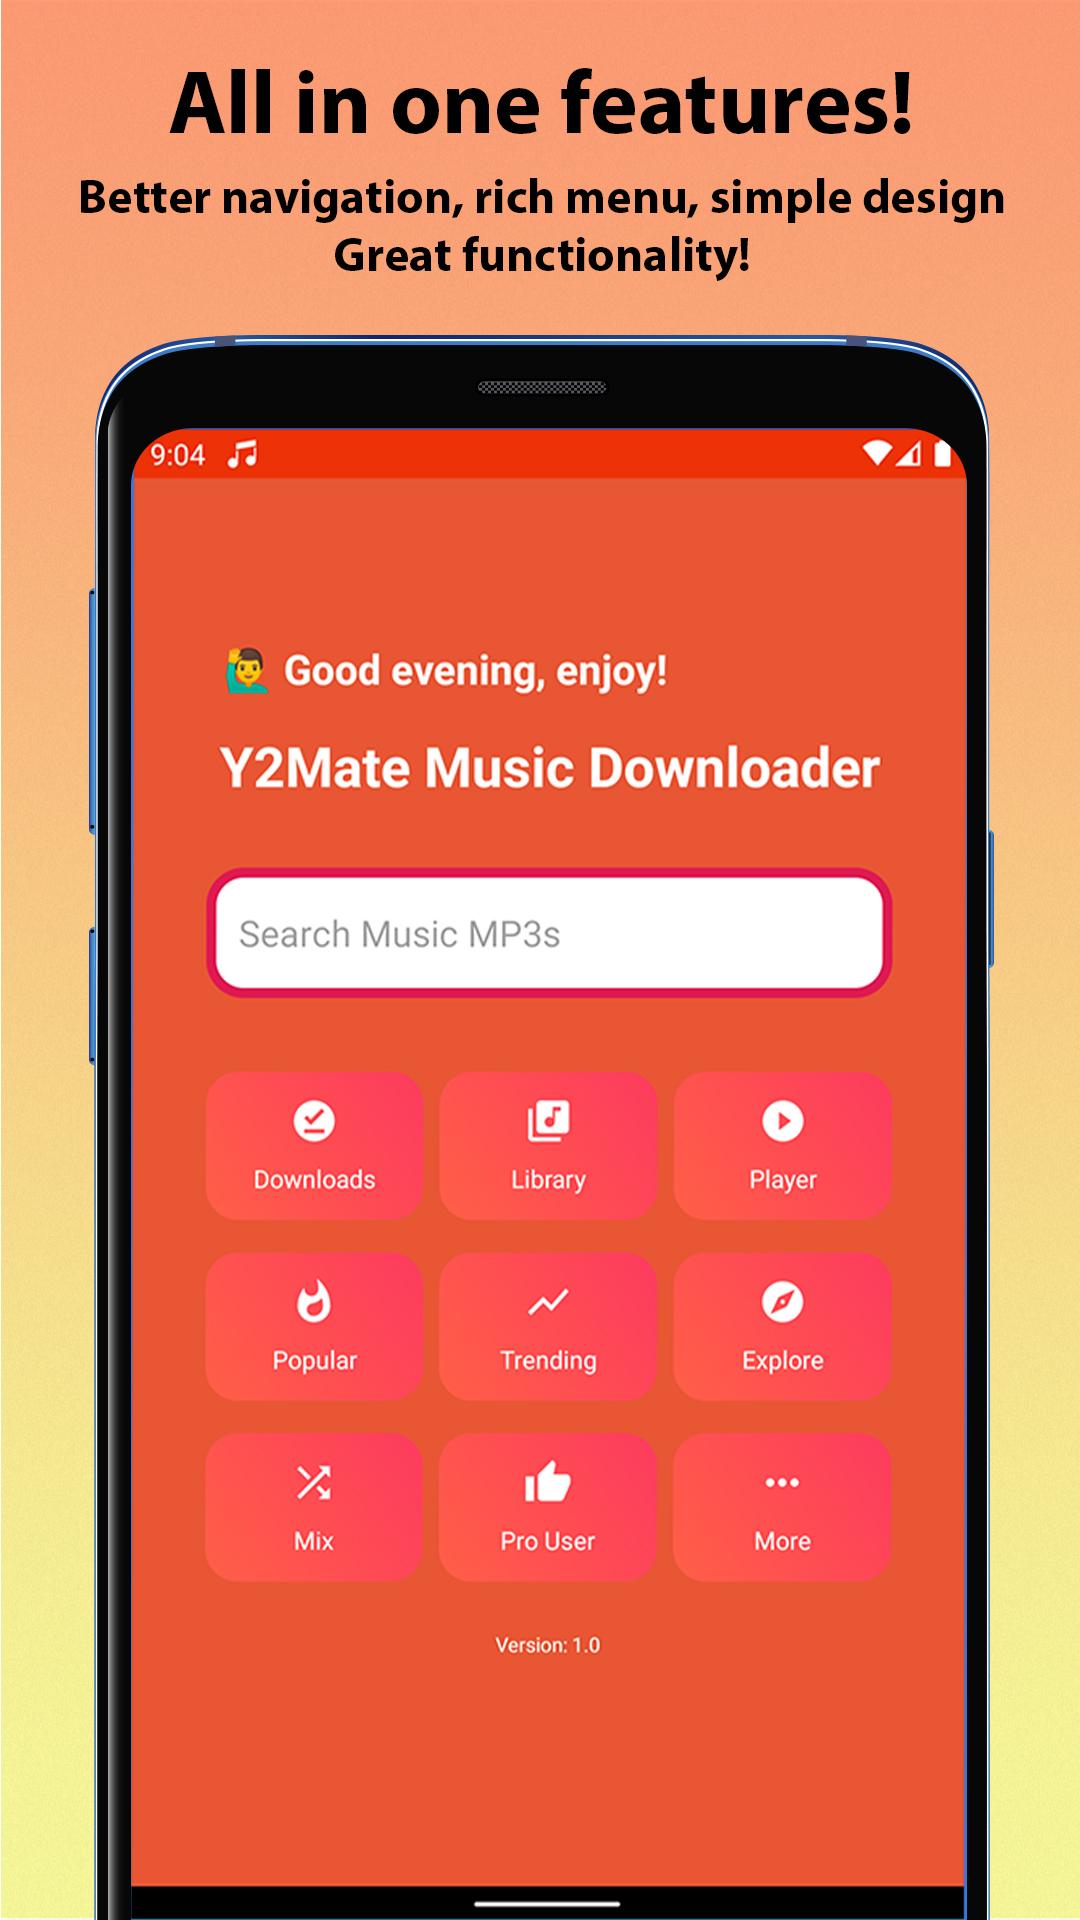 Y2Mate - MP3 Music Downloader for Android - APK Download